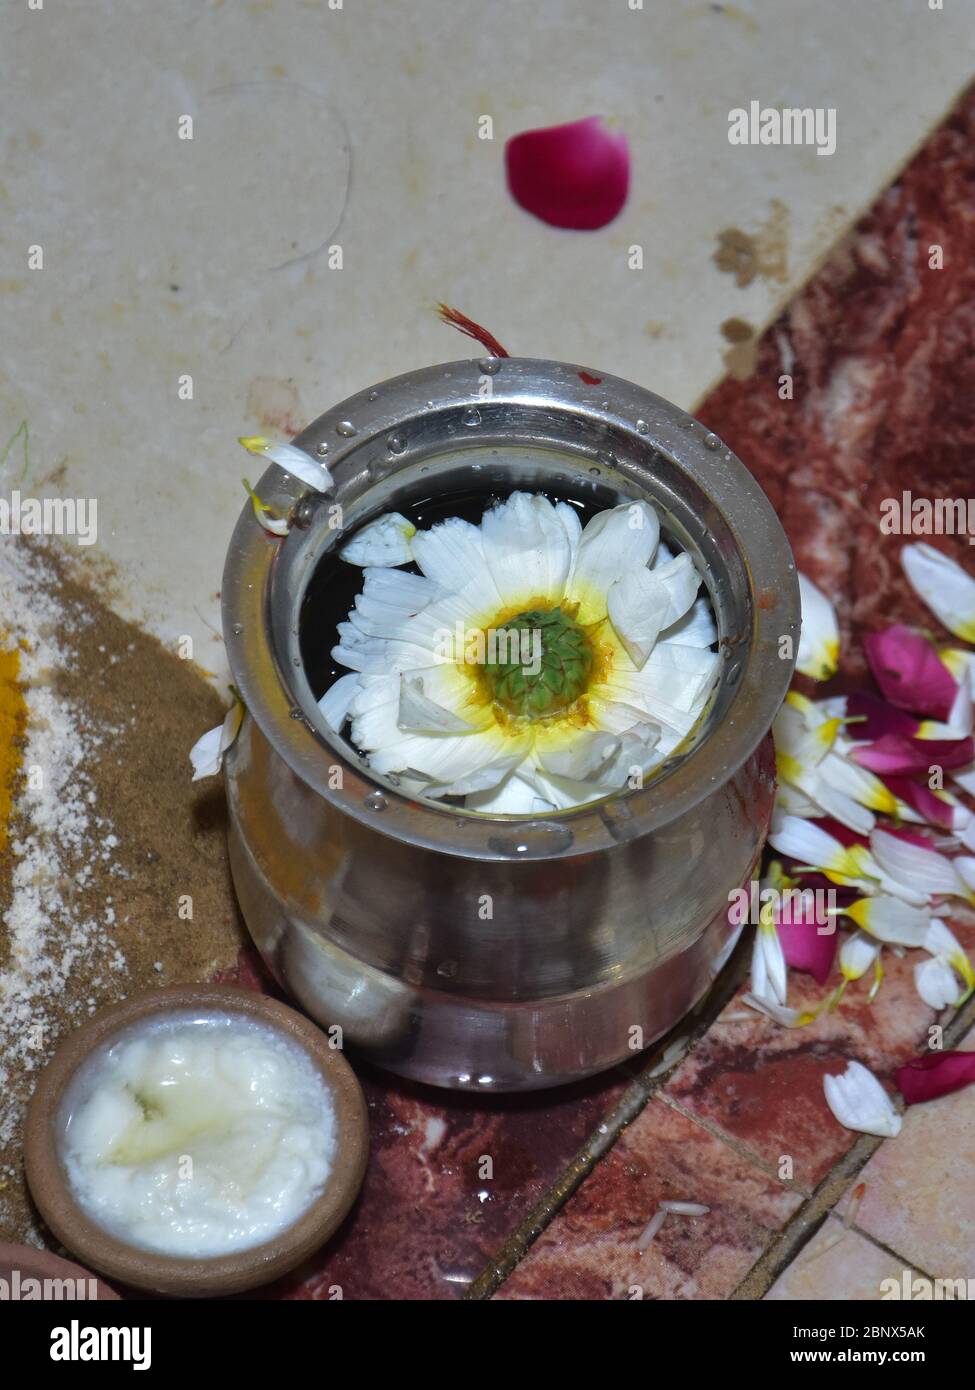 A view of a marigold flower floating in water in a steel pot Stock Photo